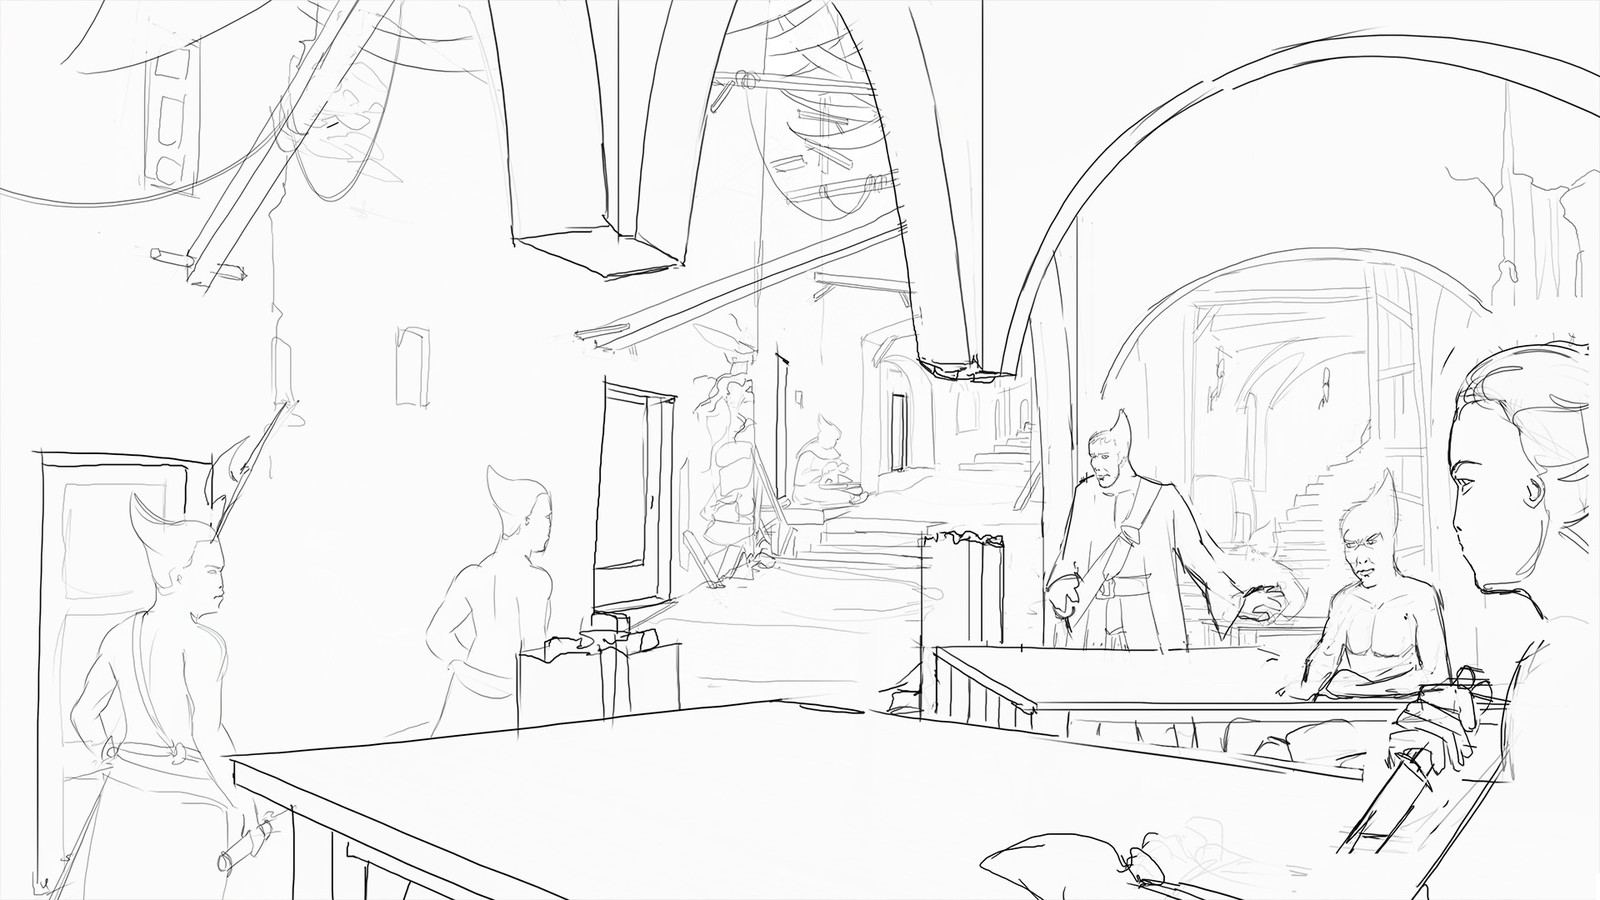 Fleshed out idea. Wanted to show the state of the environment a bit more, and less focus on interior. 